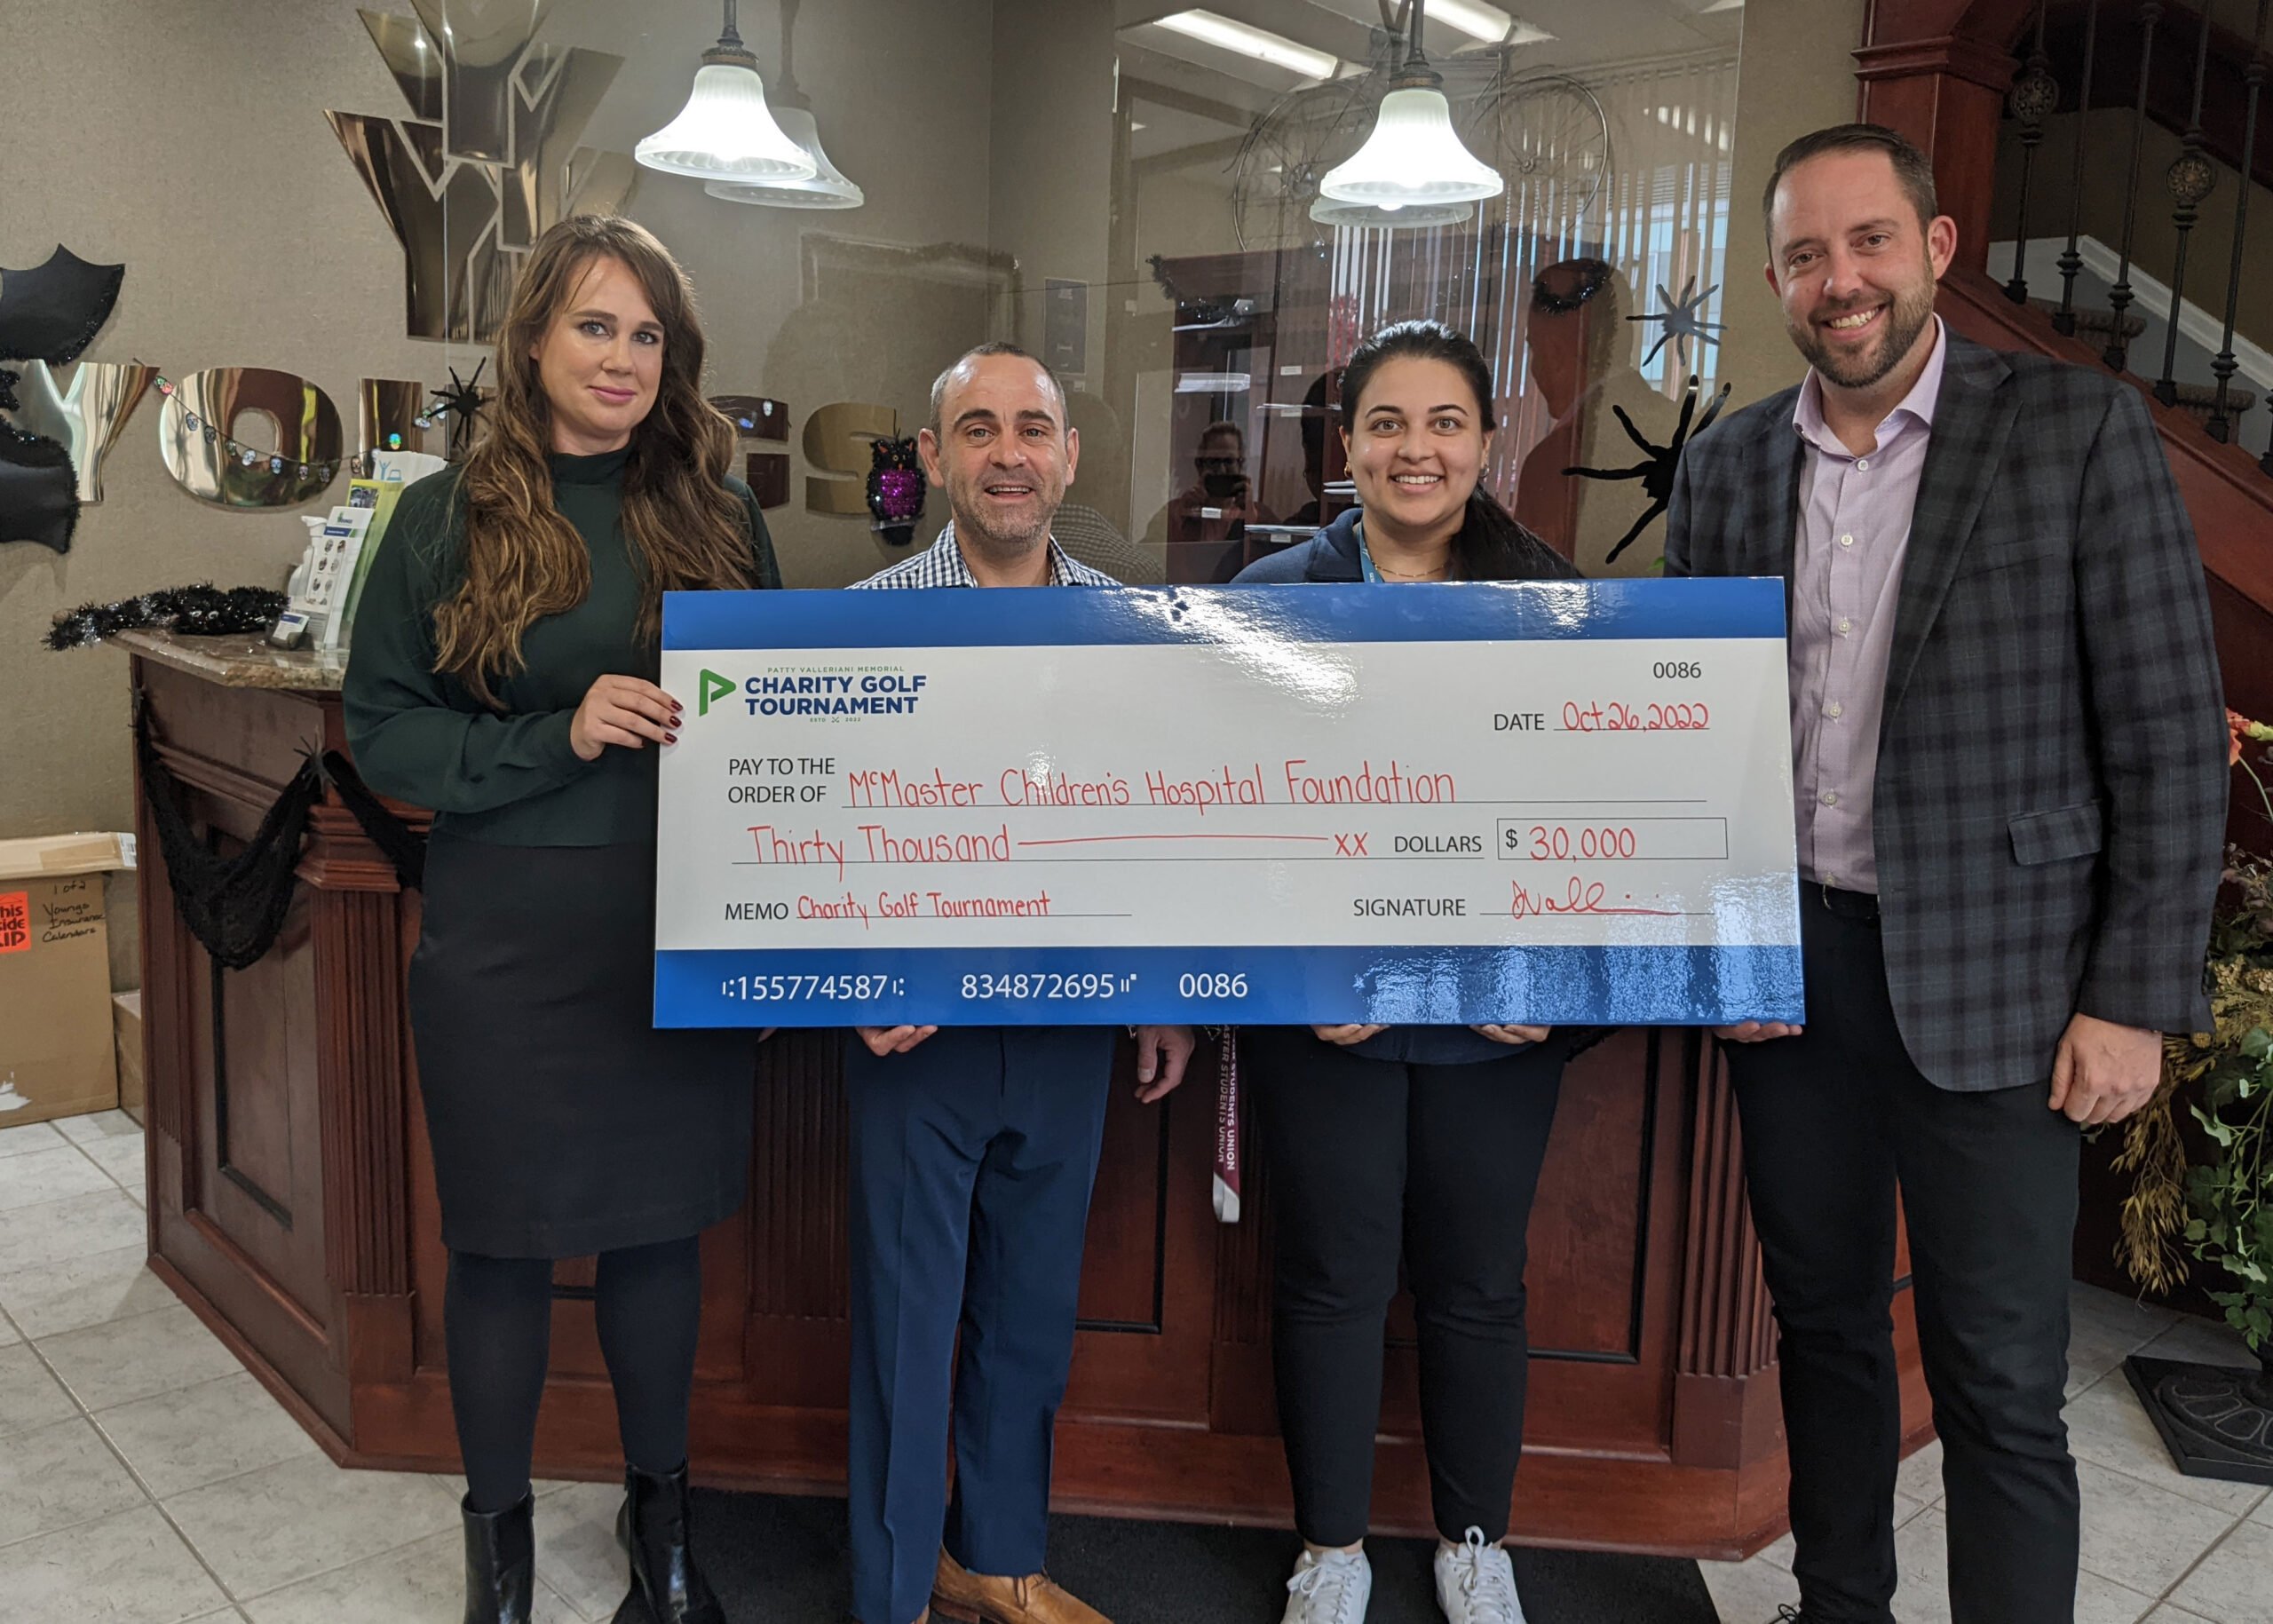 Last October, Youngs Insurance Brokers presented a cheque for $30,000 to McMaster Children’s Hospital Foundation through their charity golf tournament.